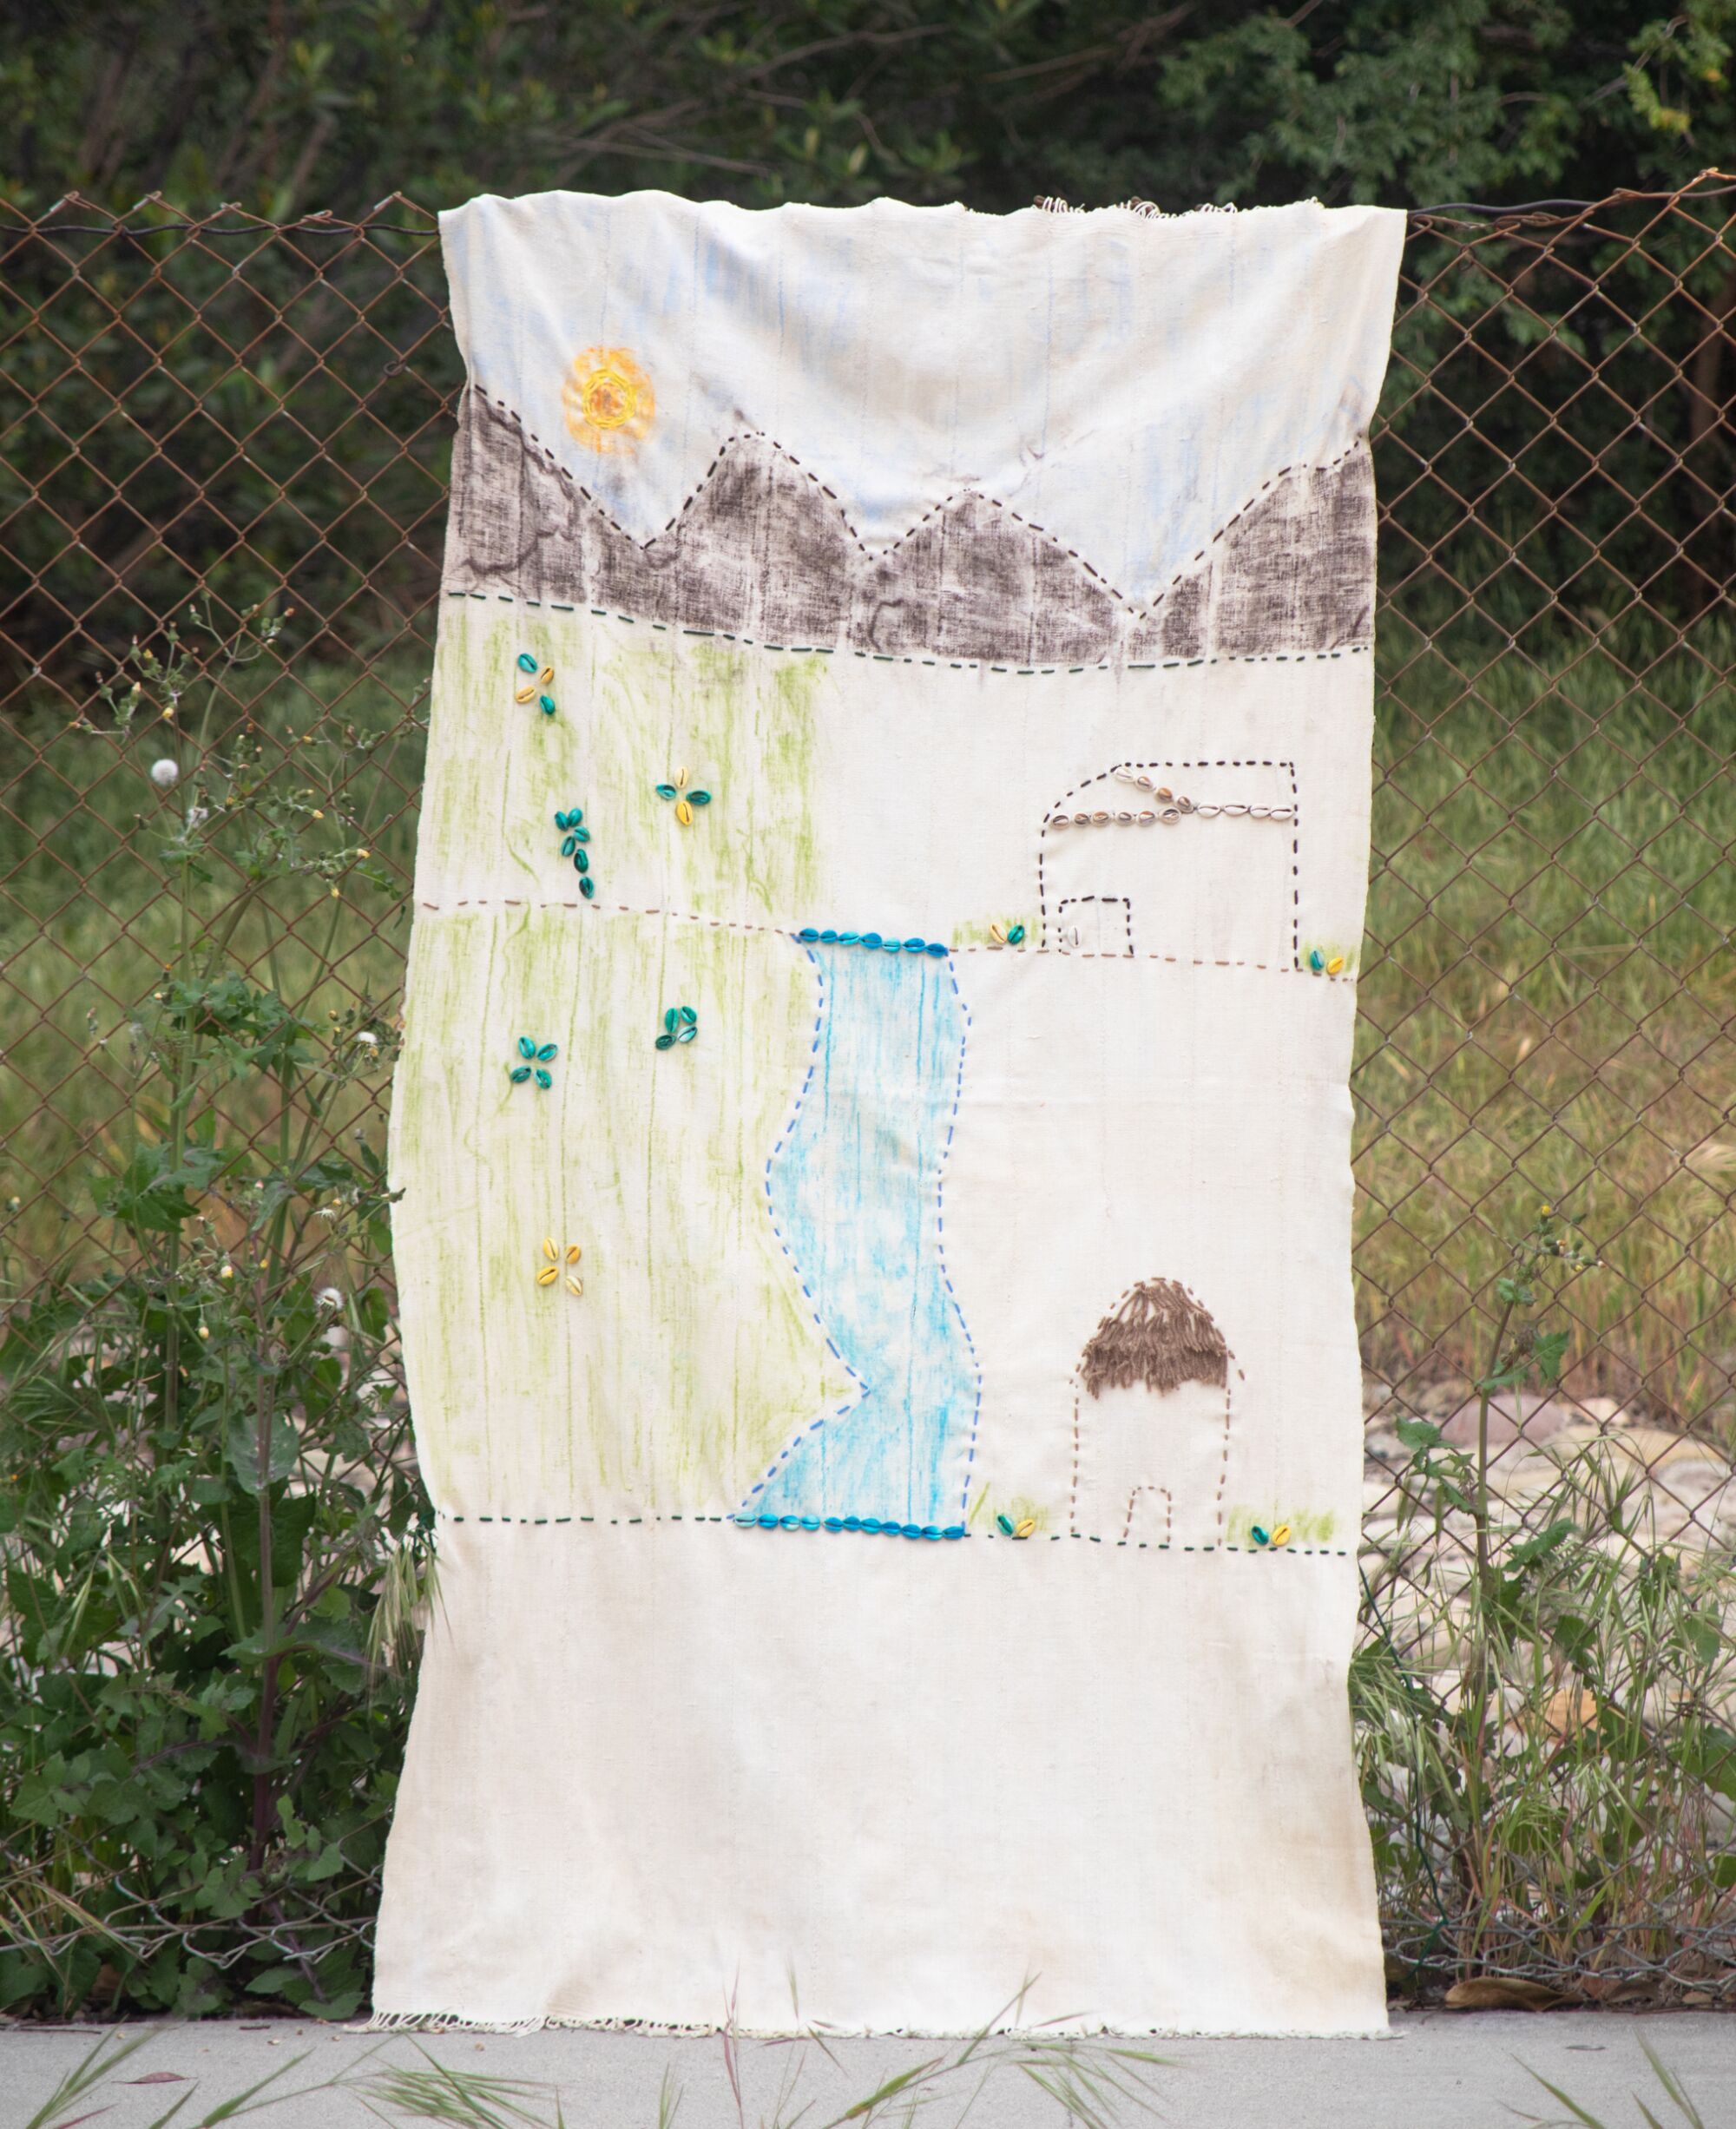 A textile depicting a village in the mountains hangs on a fence by the 118 freeeway